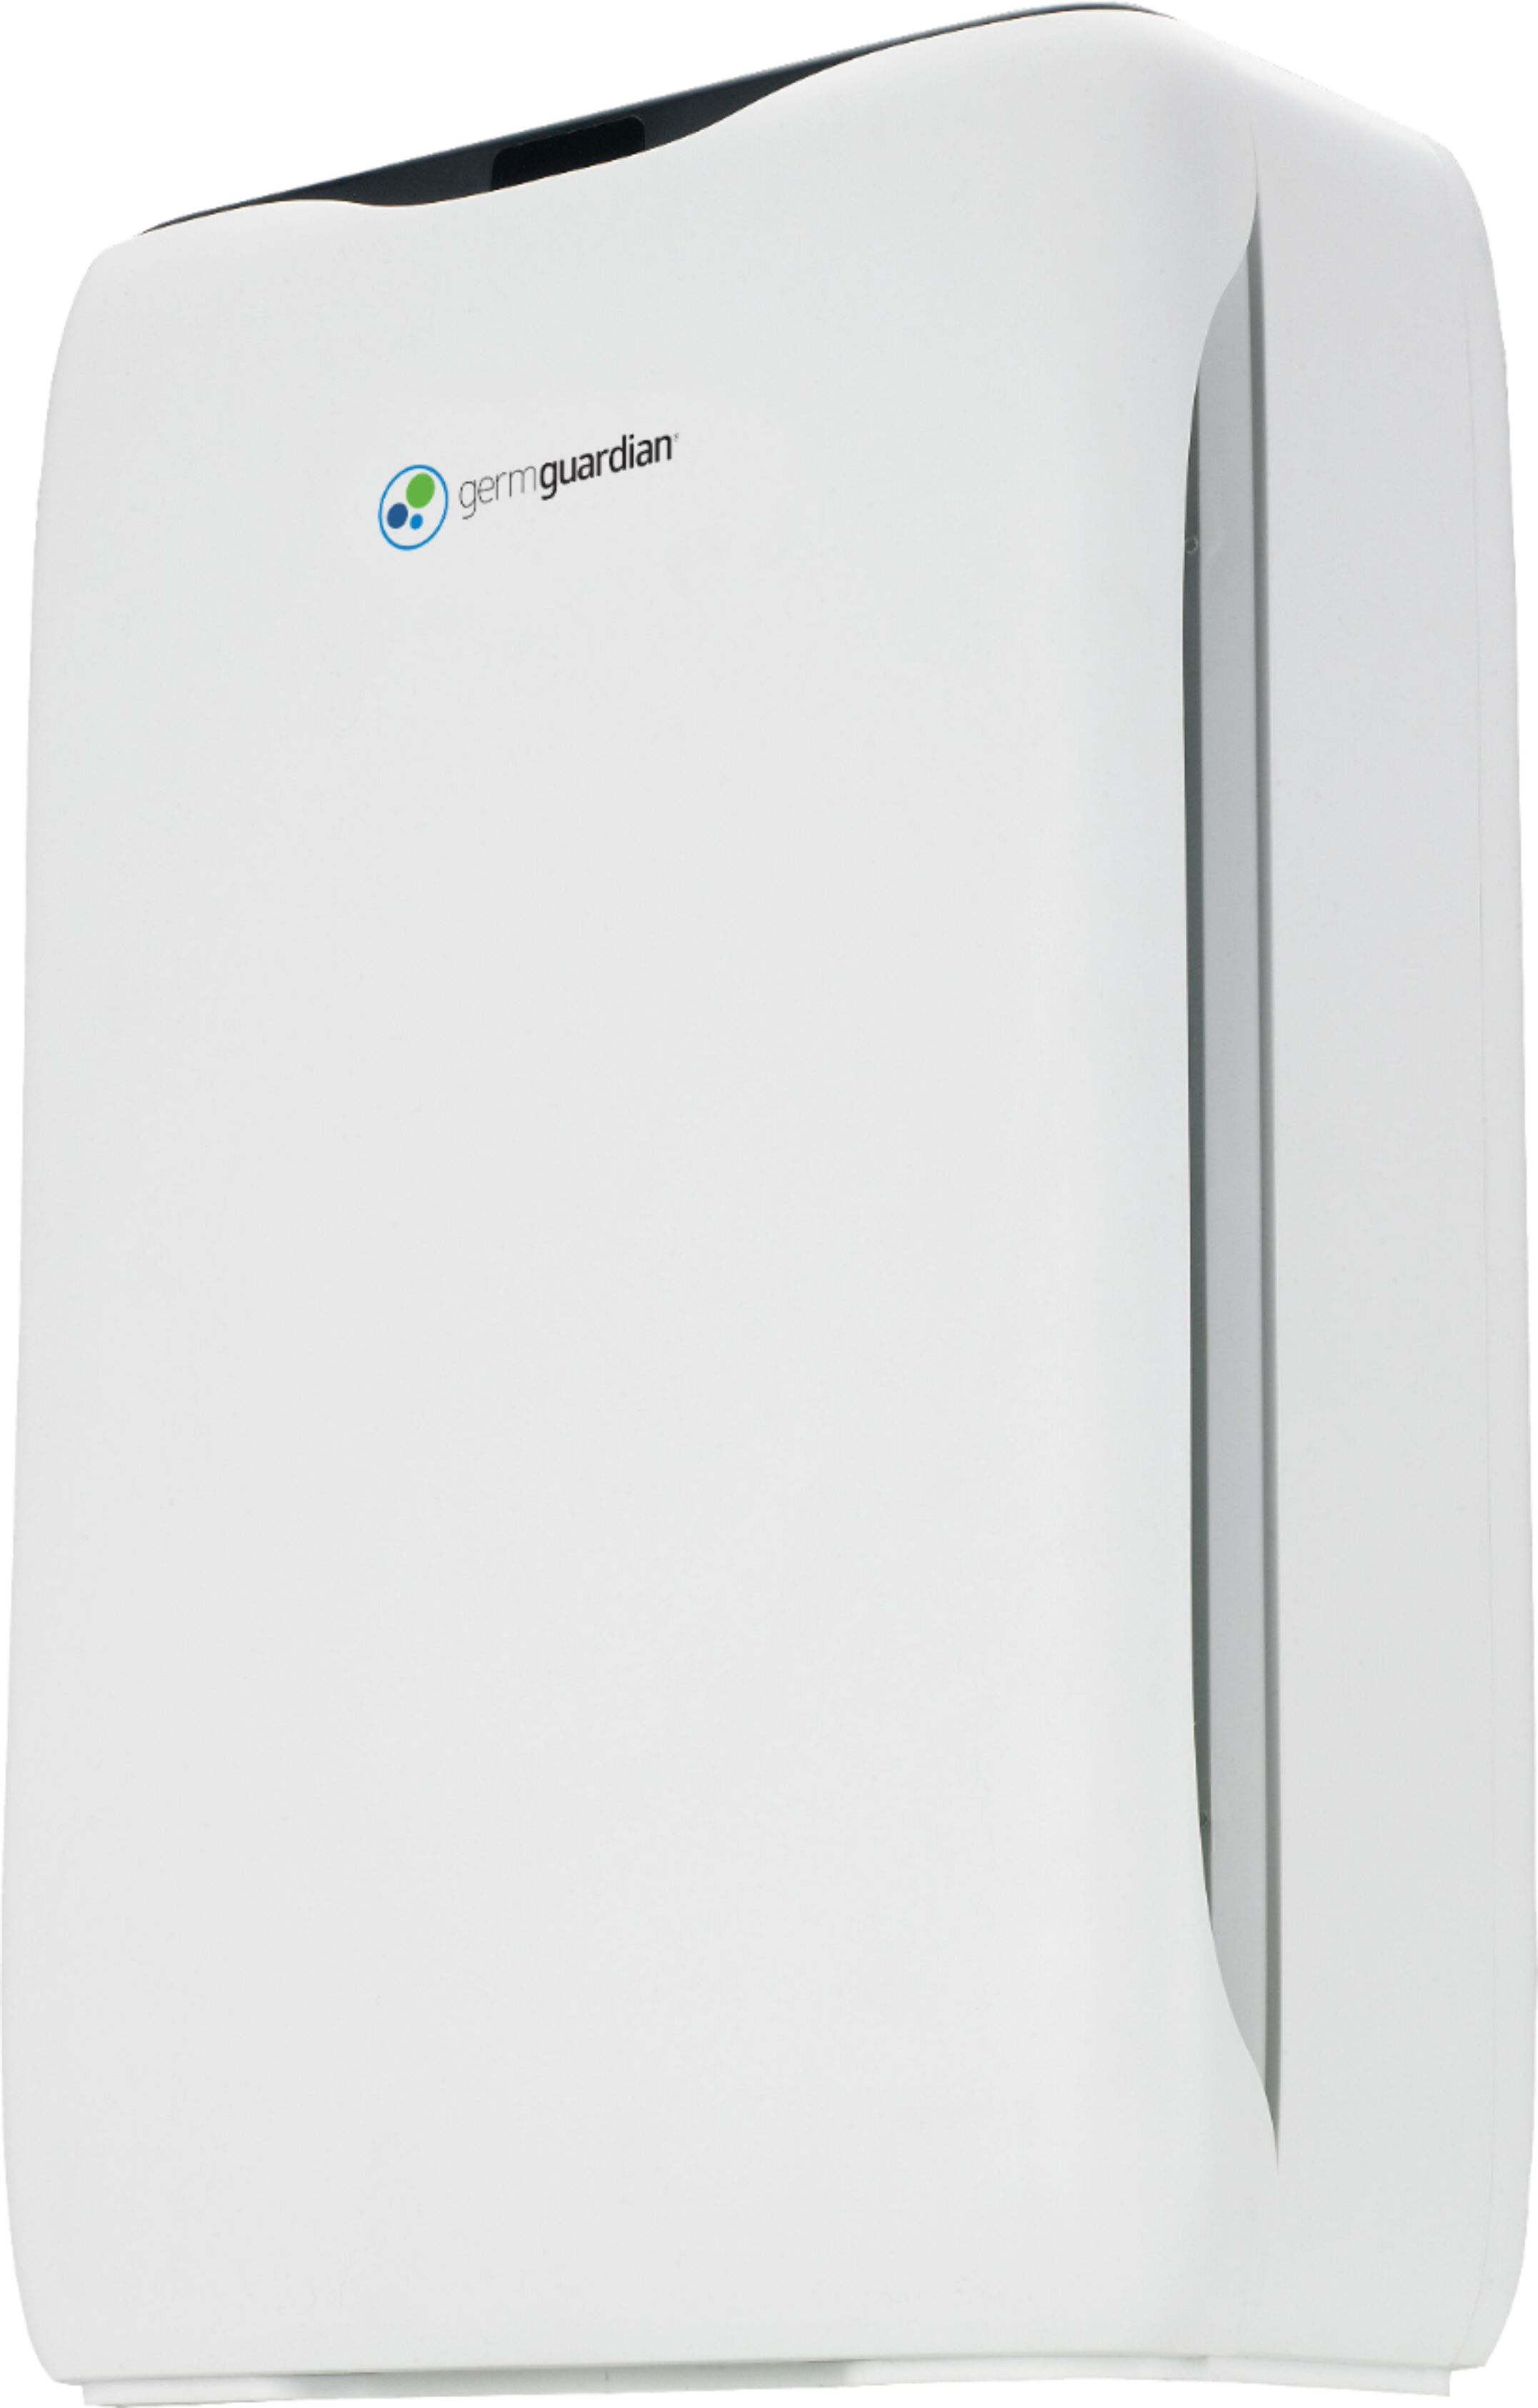 Angle View: GermGuardian - 158 Sq. Ft Tower Air Purifier - Gray